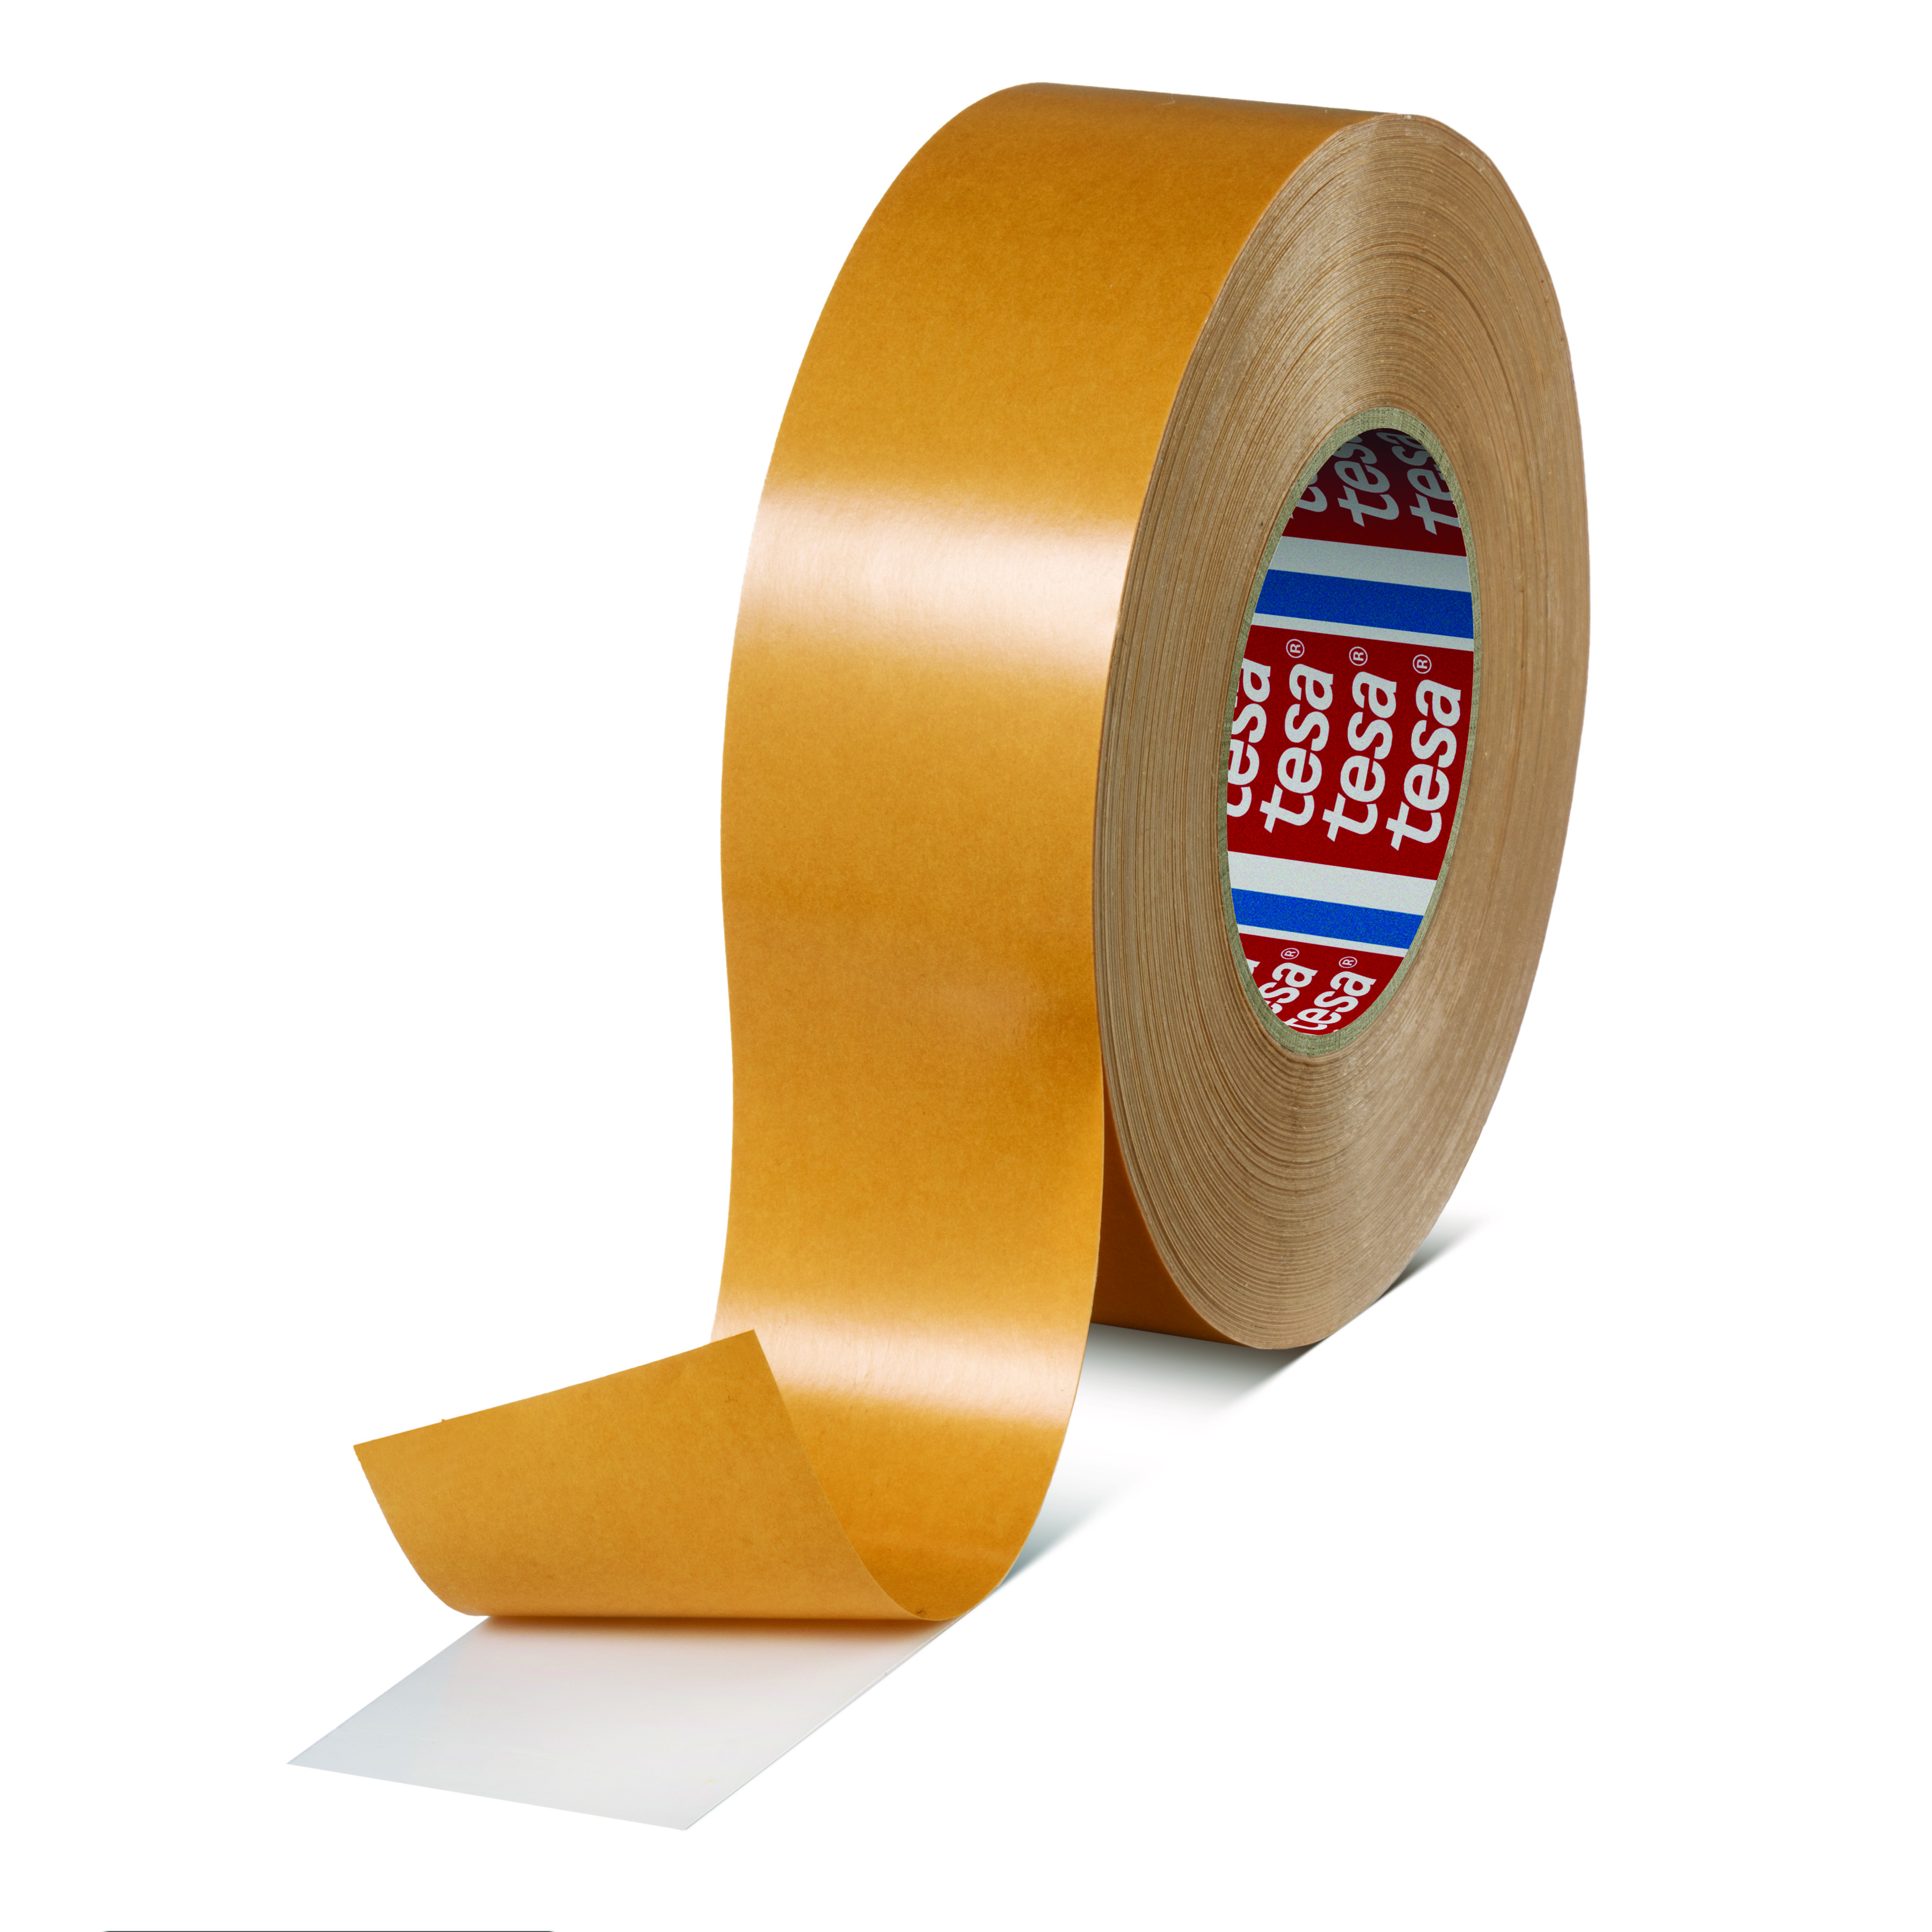 Tesa® 51977 Double Sided PP Tape 12mm x 50m